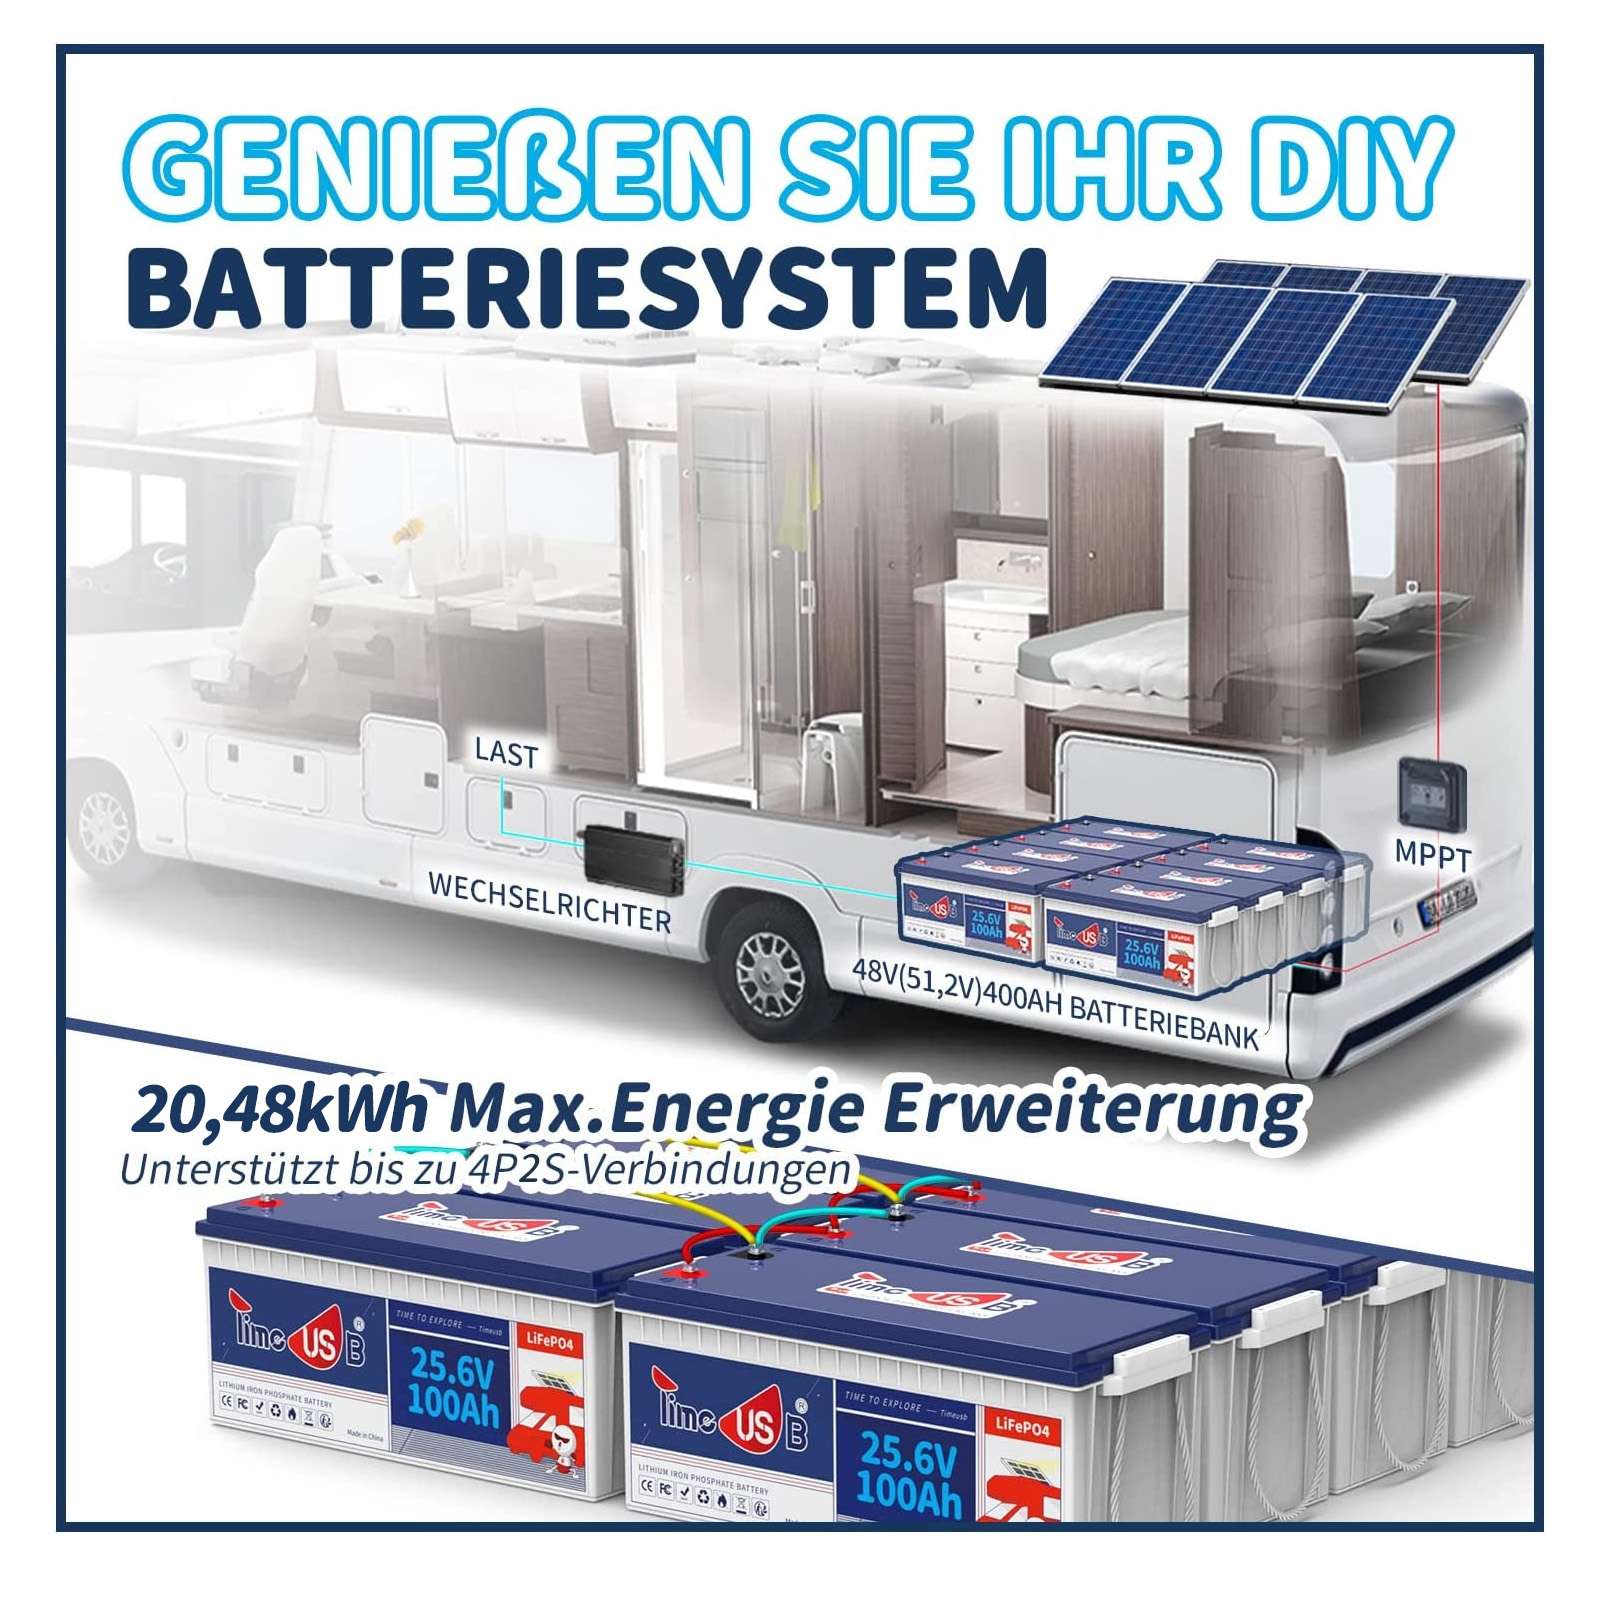 Tax free-Timeusb 24V 100Ah LiFePO4 Batterie  | 2,56kWh & 2,56kW